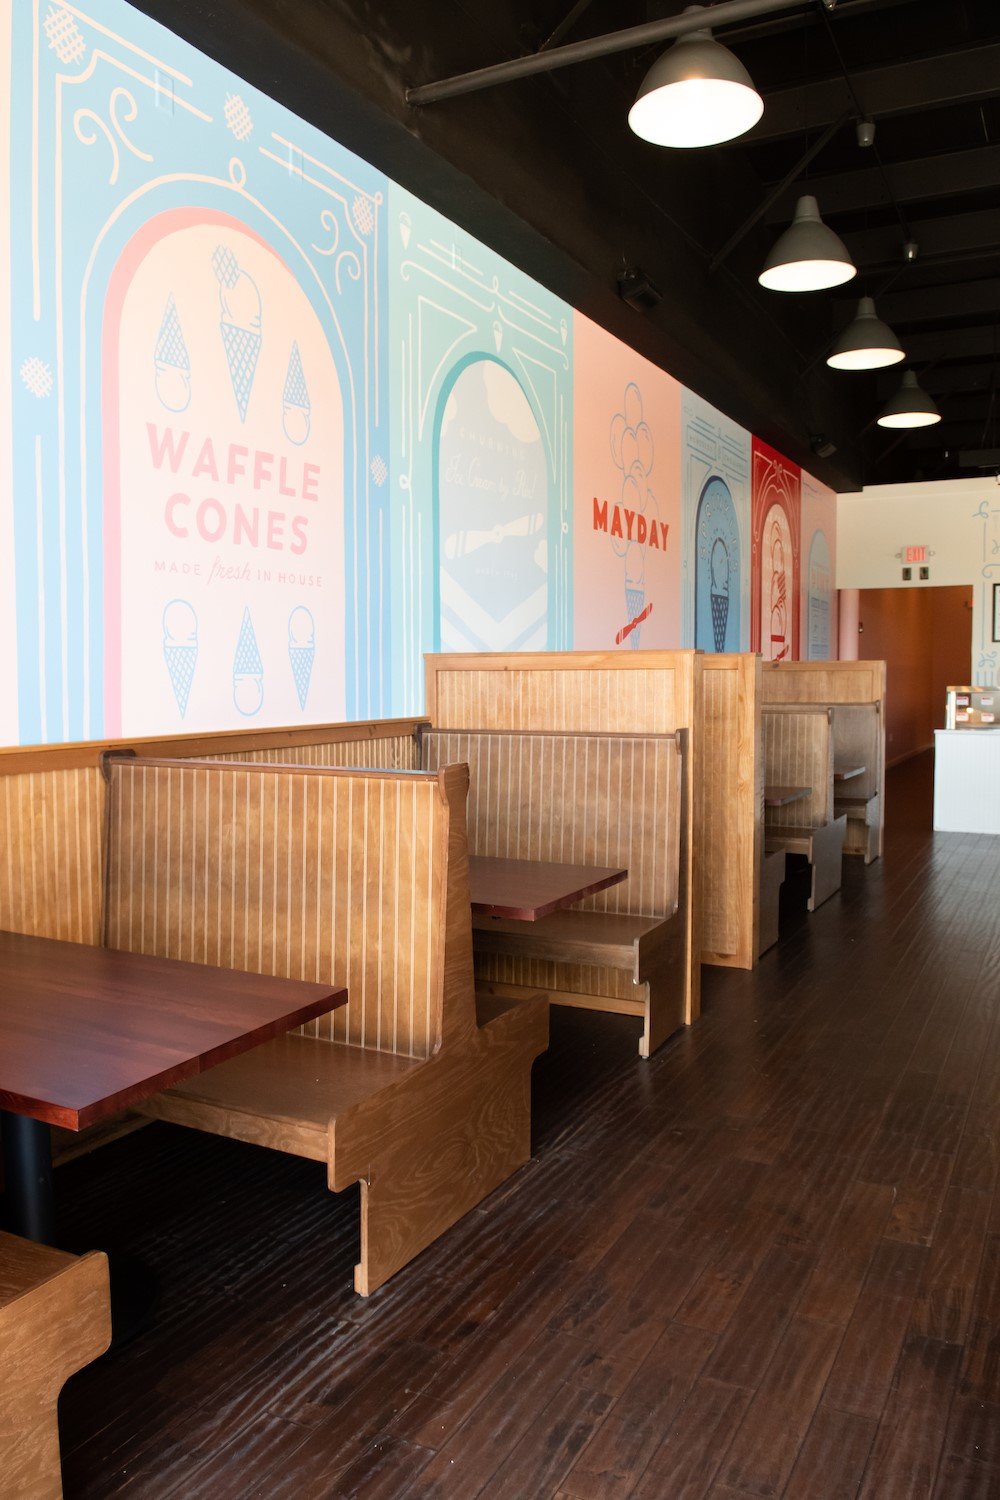 The interior of Mayday Handcrafted Ice Creams.